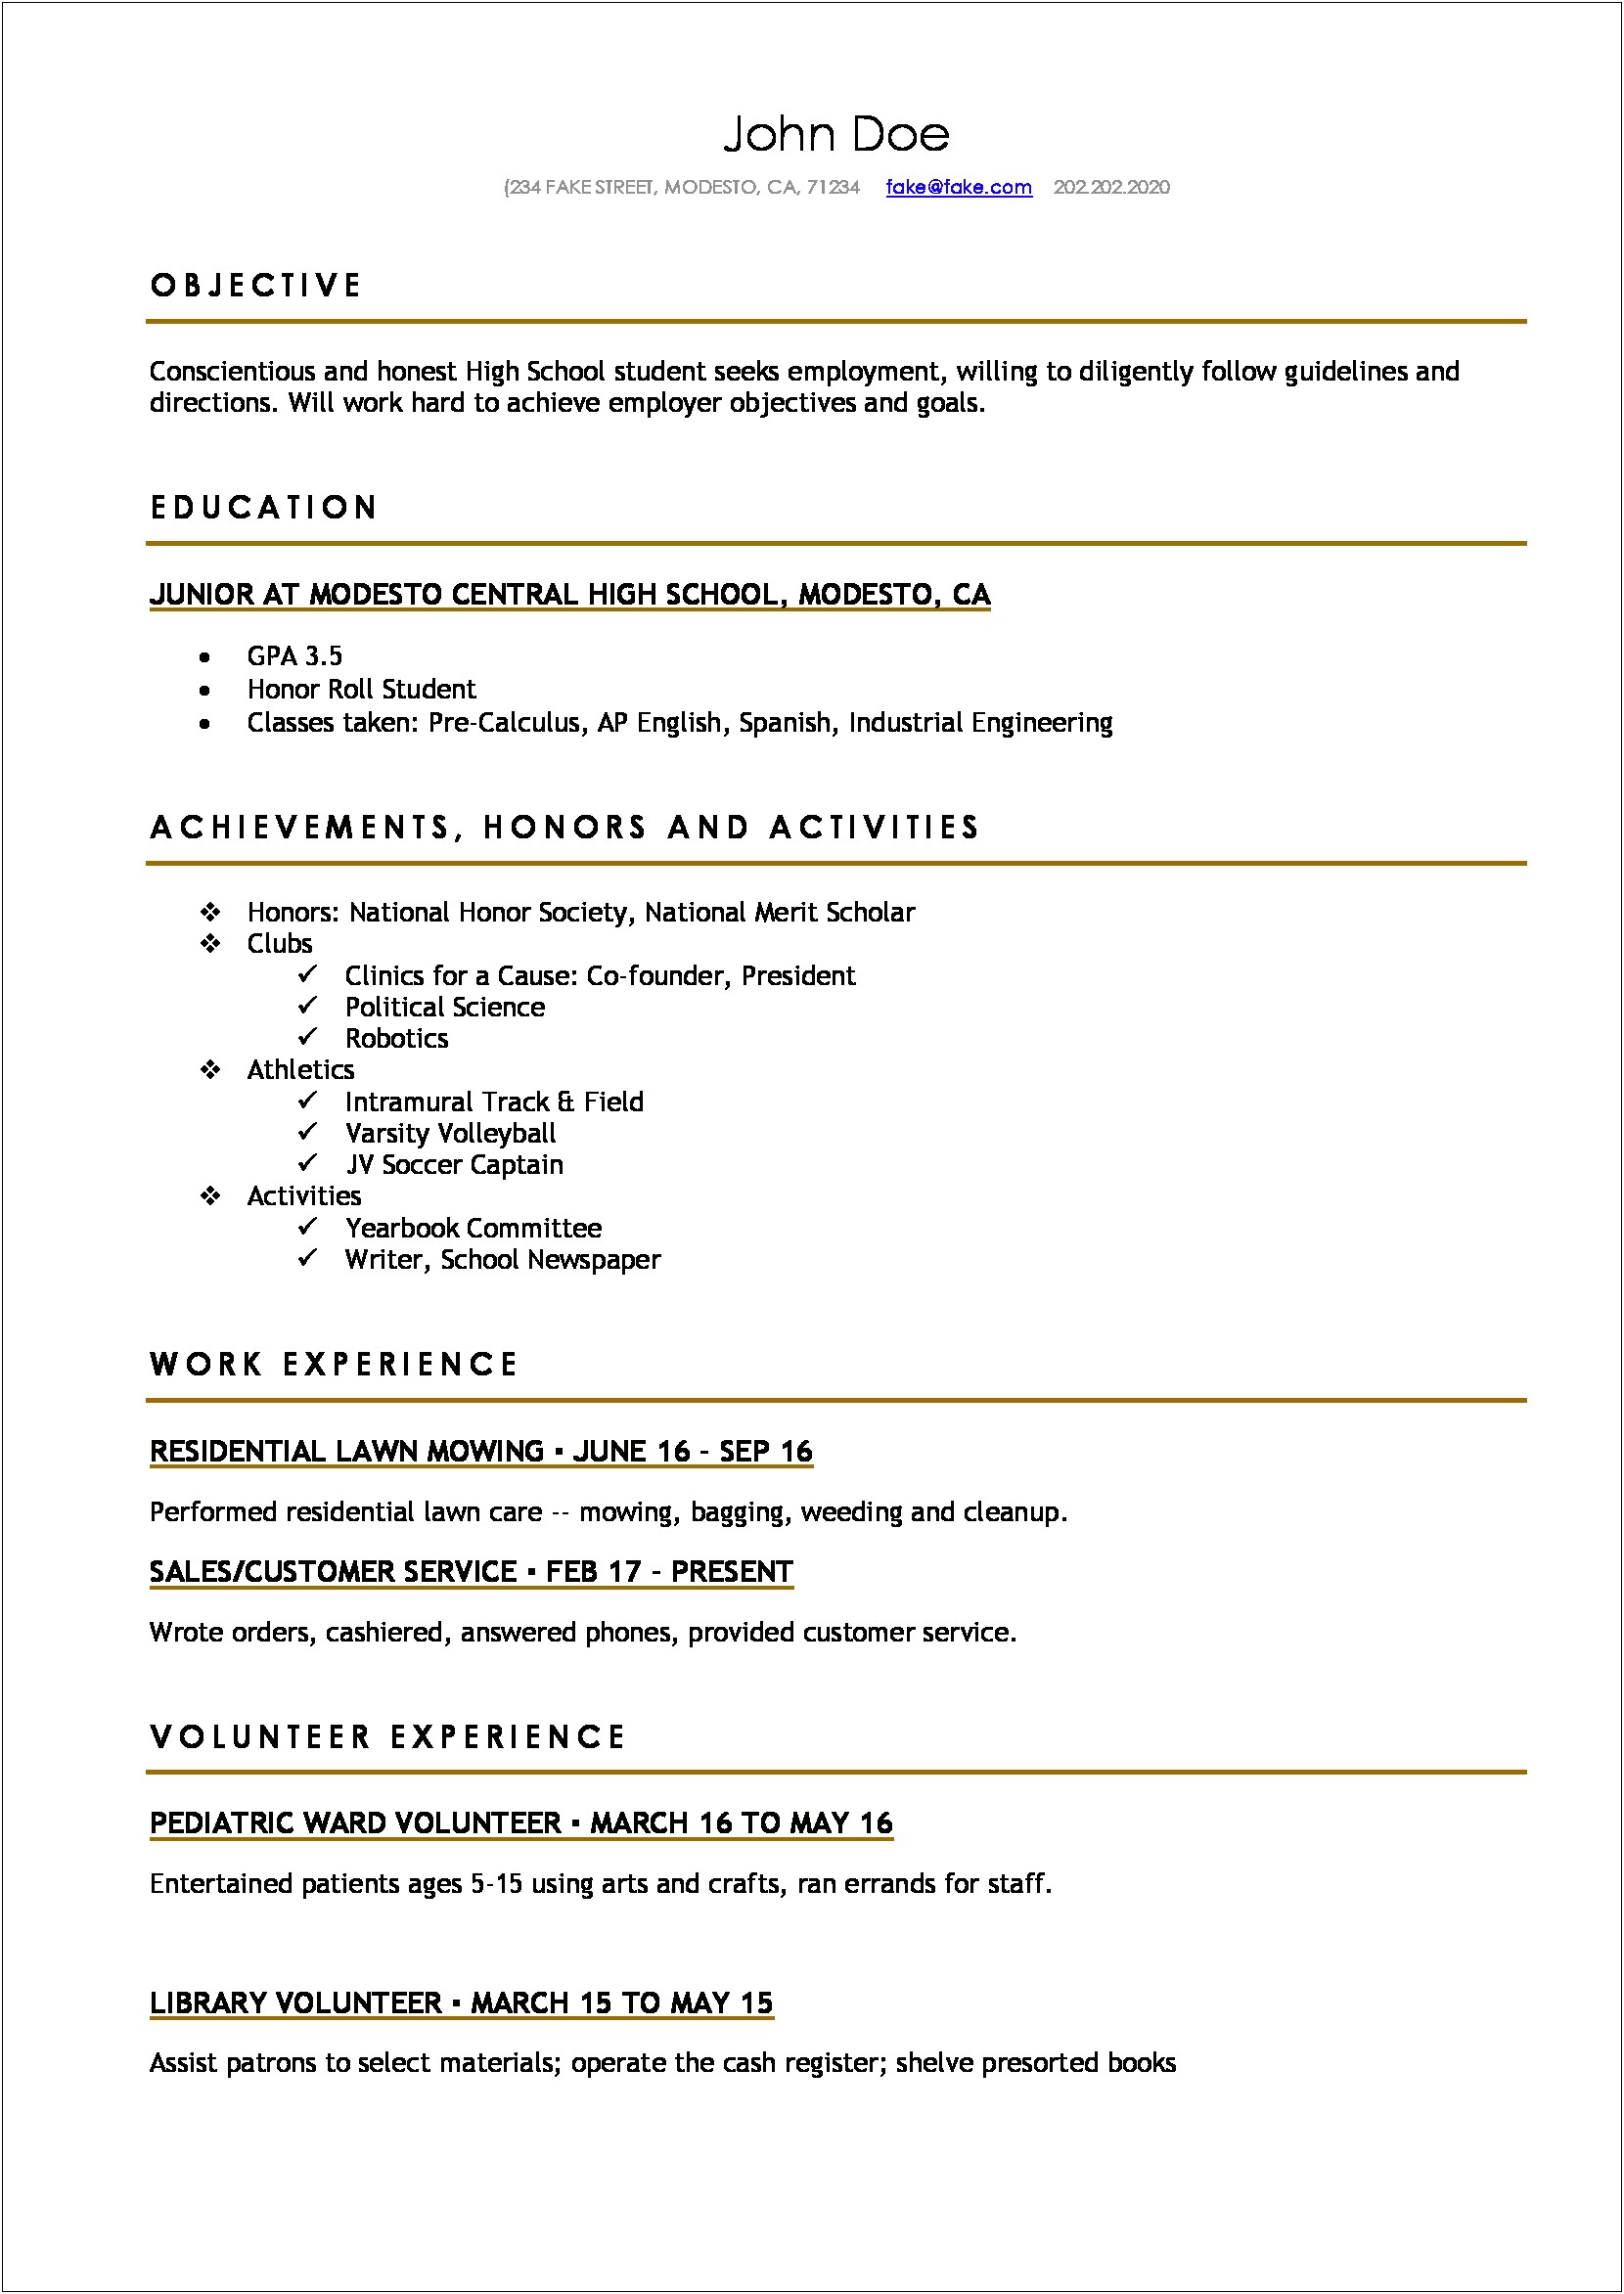 Resume That Highlights School And Emplyment